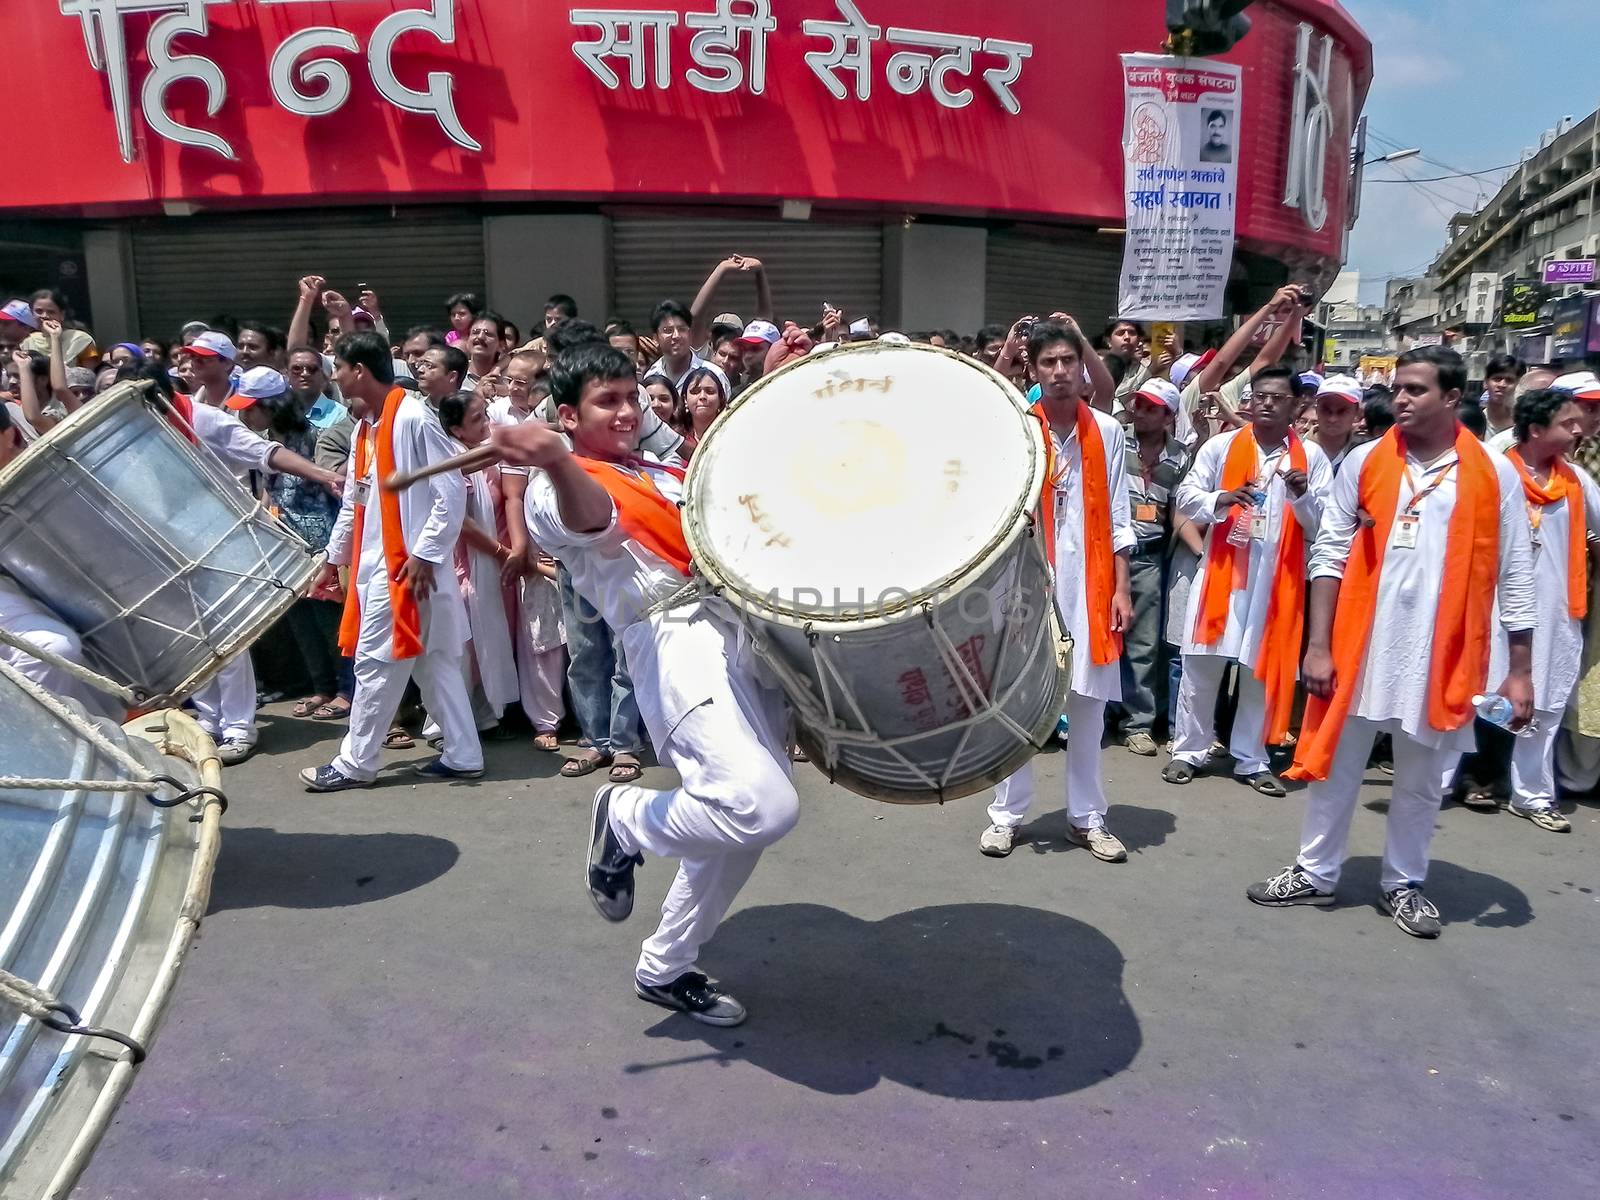 Youth beating huge traditional dhol during Ganesh festival as the crowd watches. by lalam